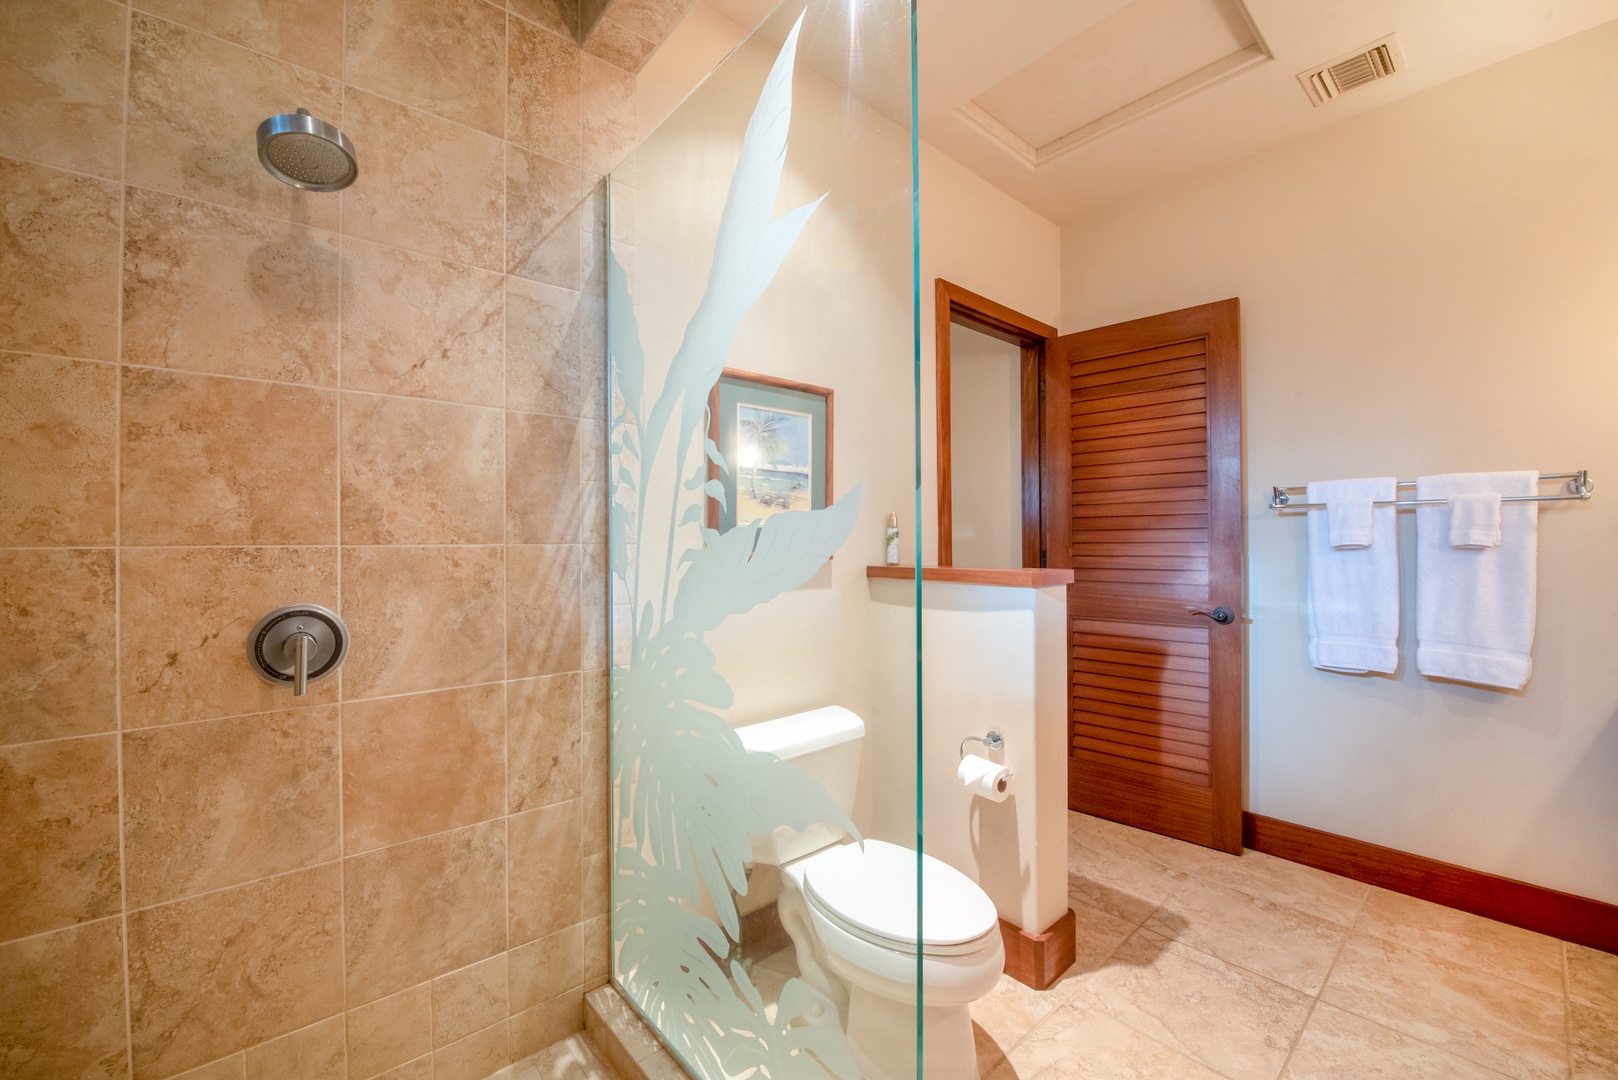 Kamuela Vacation Rentals, 3BD Estate Home at Puako Bay (10D) - Downstairs Guest Room Bath w/ Large Glass Enclosed Shower